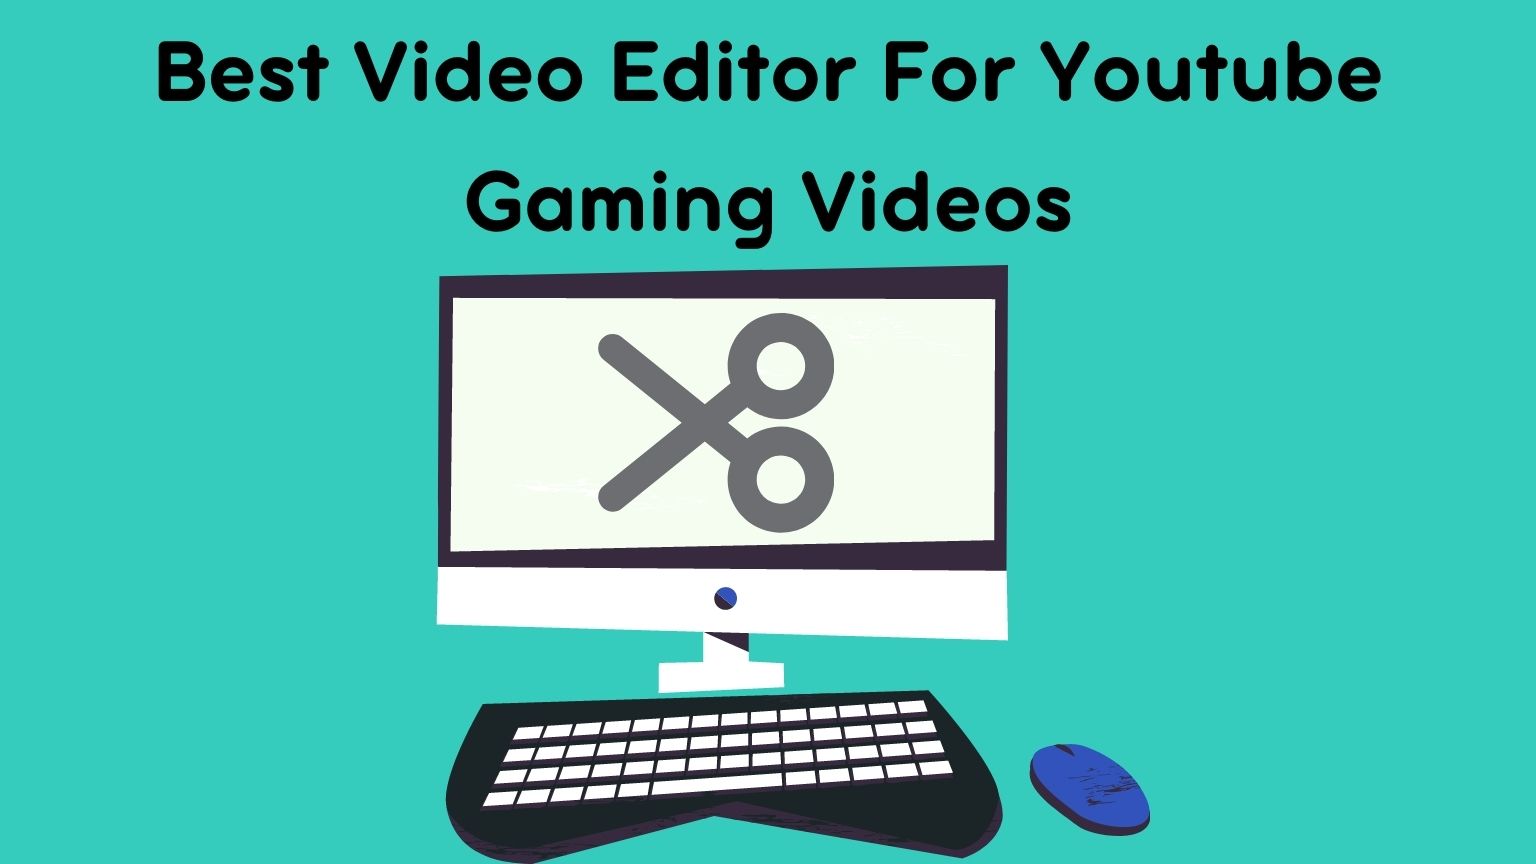 Best Video Editor For Youtube Gaming Videos (1)